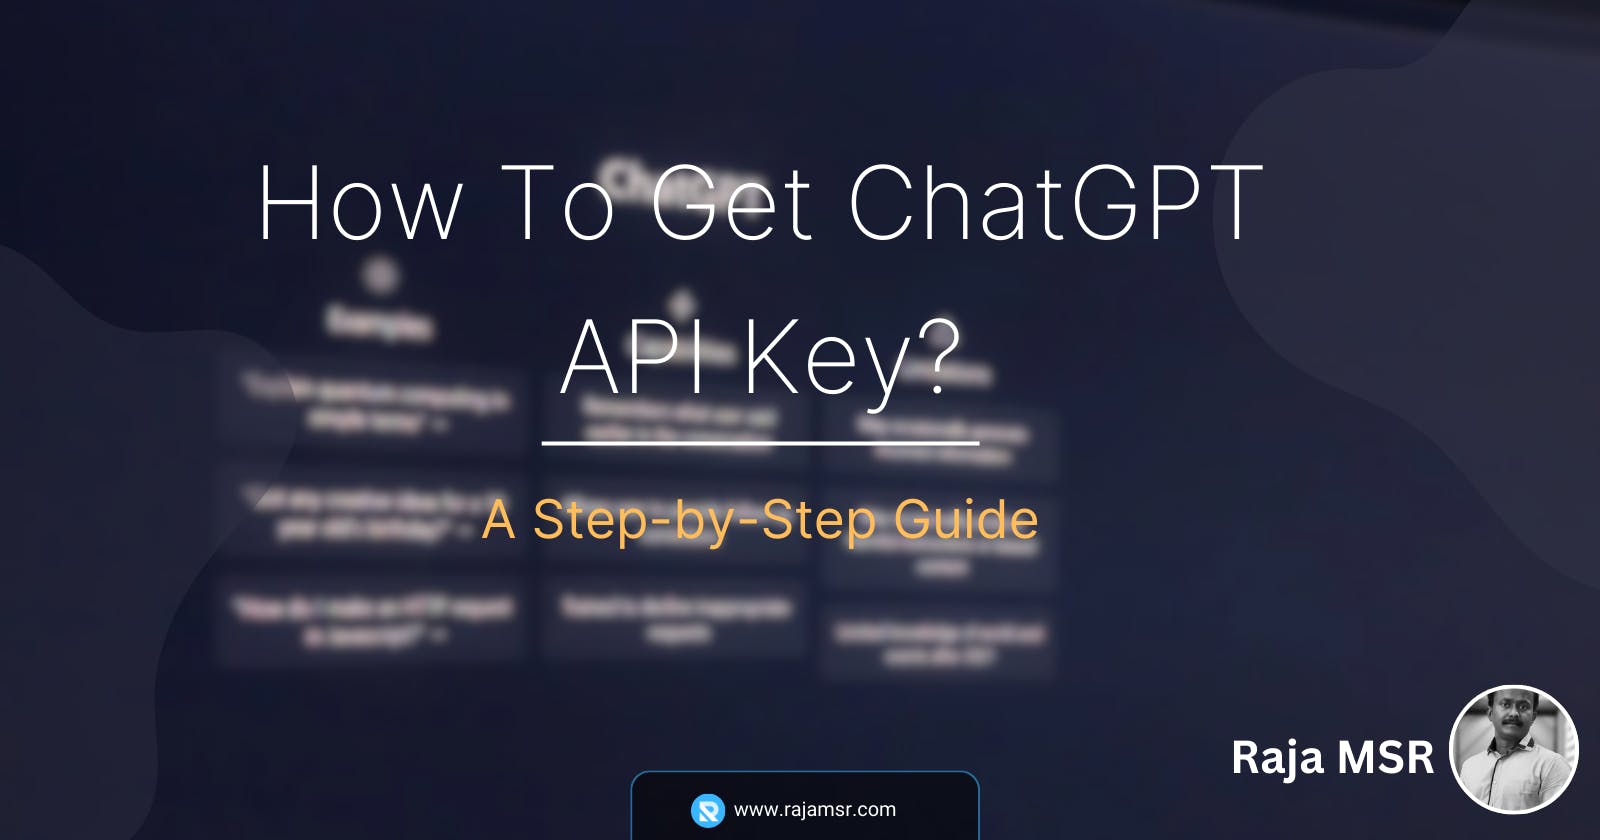 How To Get ChatGPT API Key? A Step-by-Step Guide